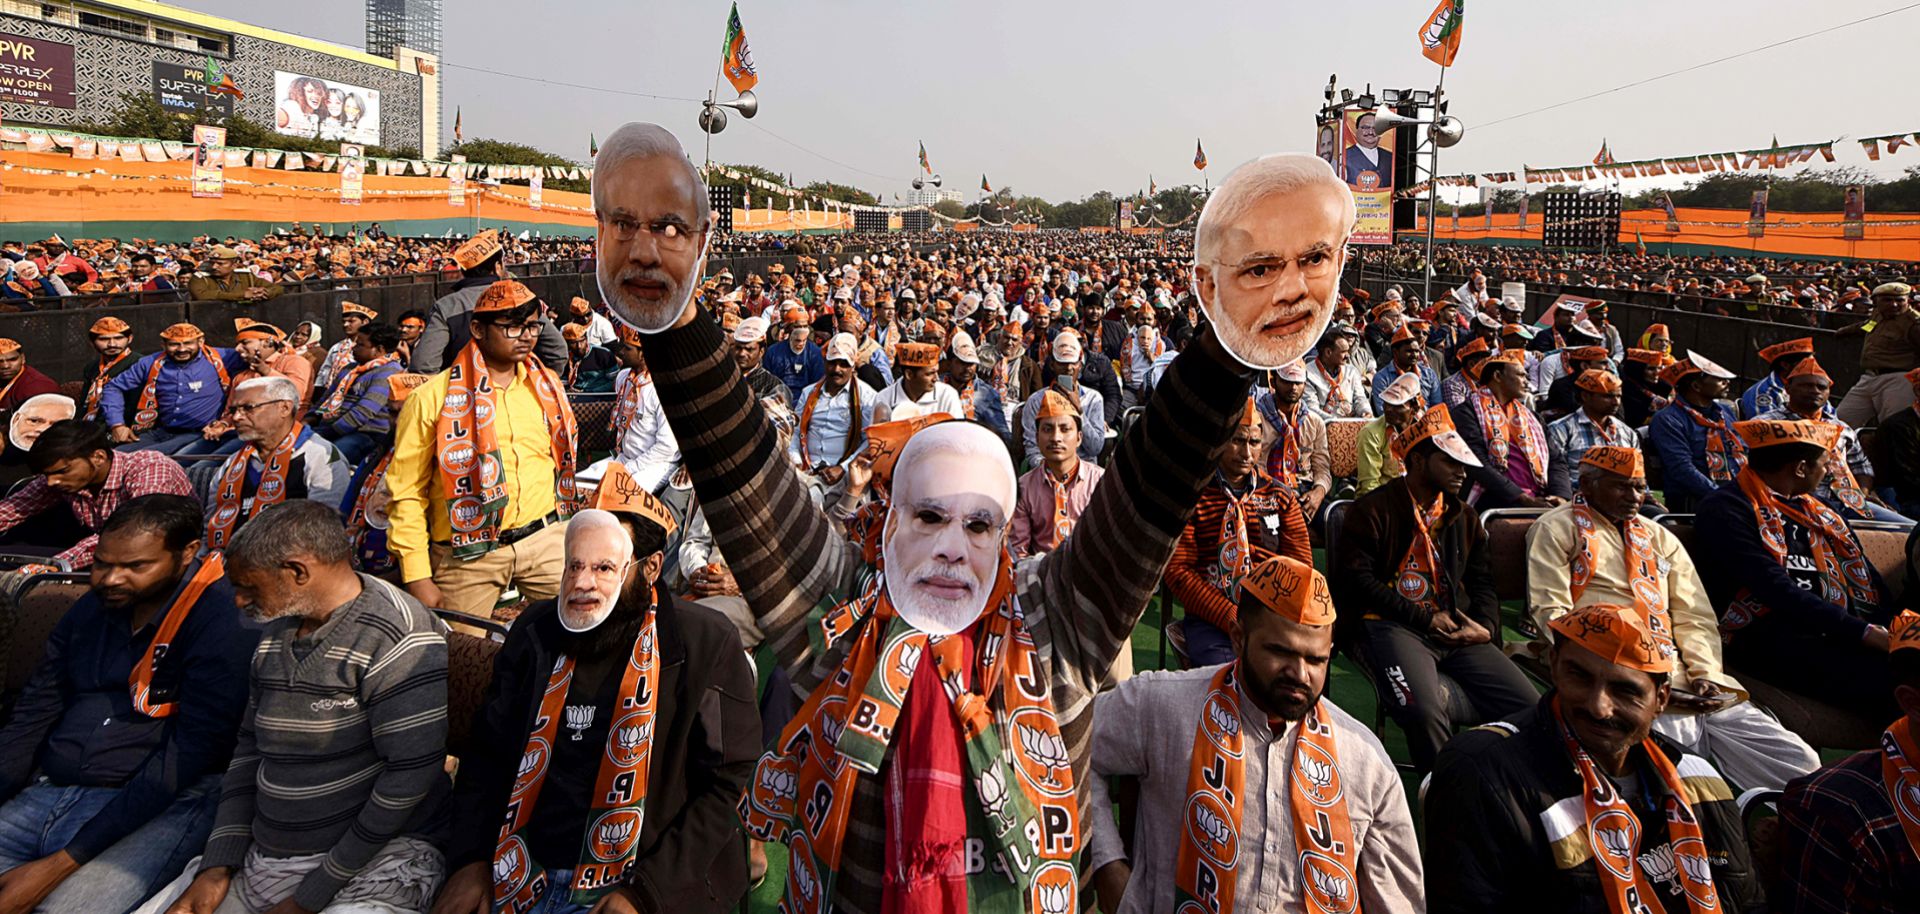 Supporters of Indian Prime Minister Narendra Modi and his Bharatiya Janata Party rally in New Delhi on Feb. 4, 2020, ahead of the territory's assembly elections on Feb. 8.